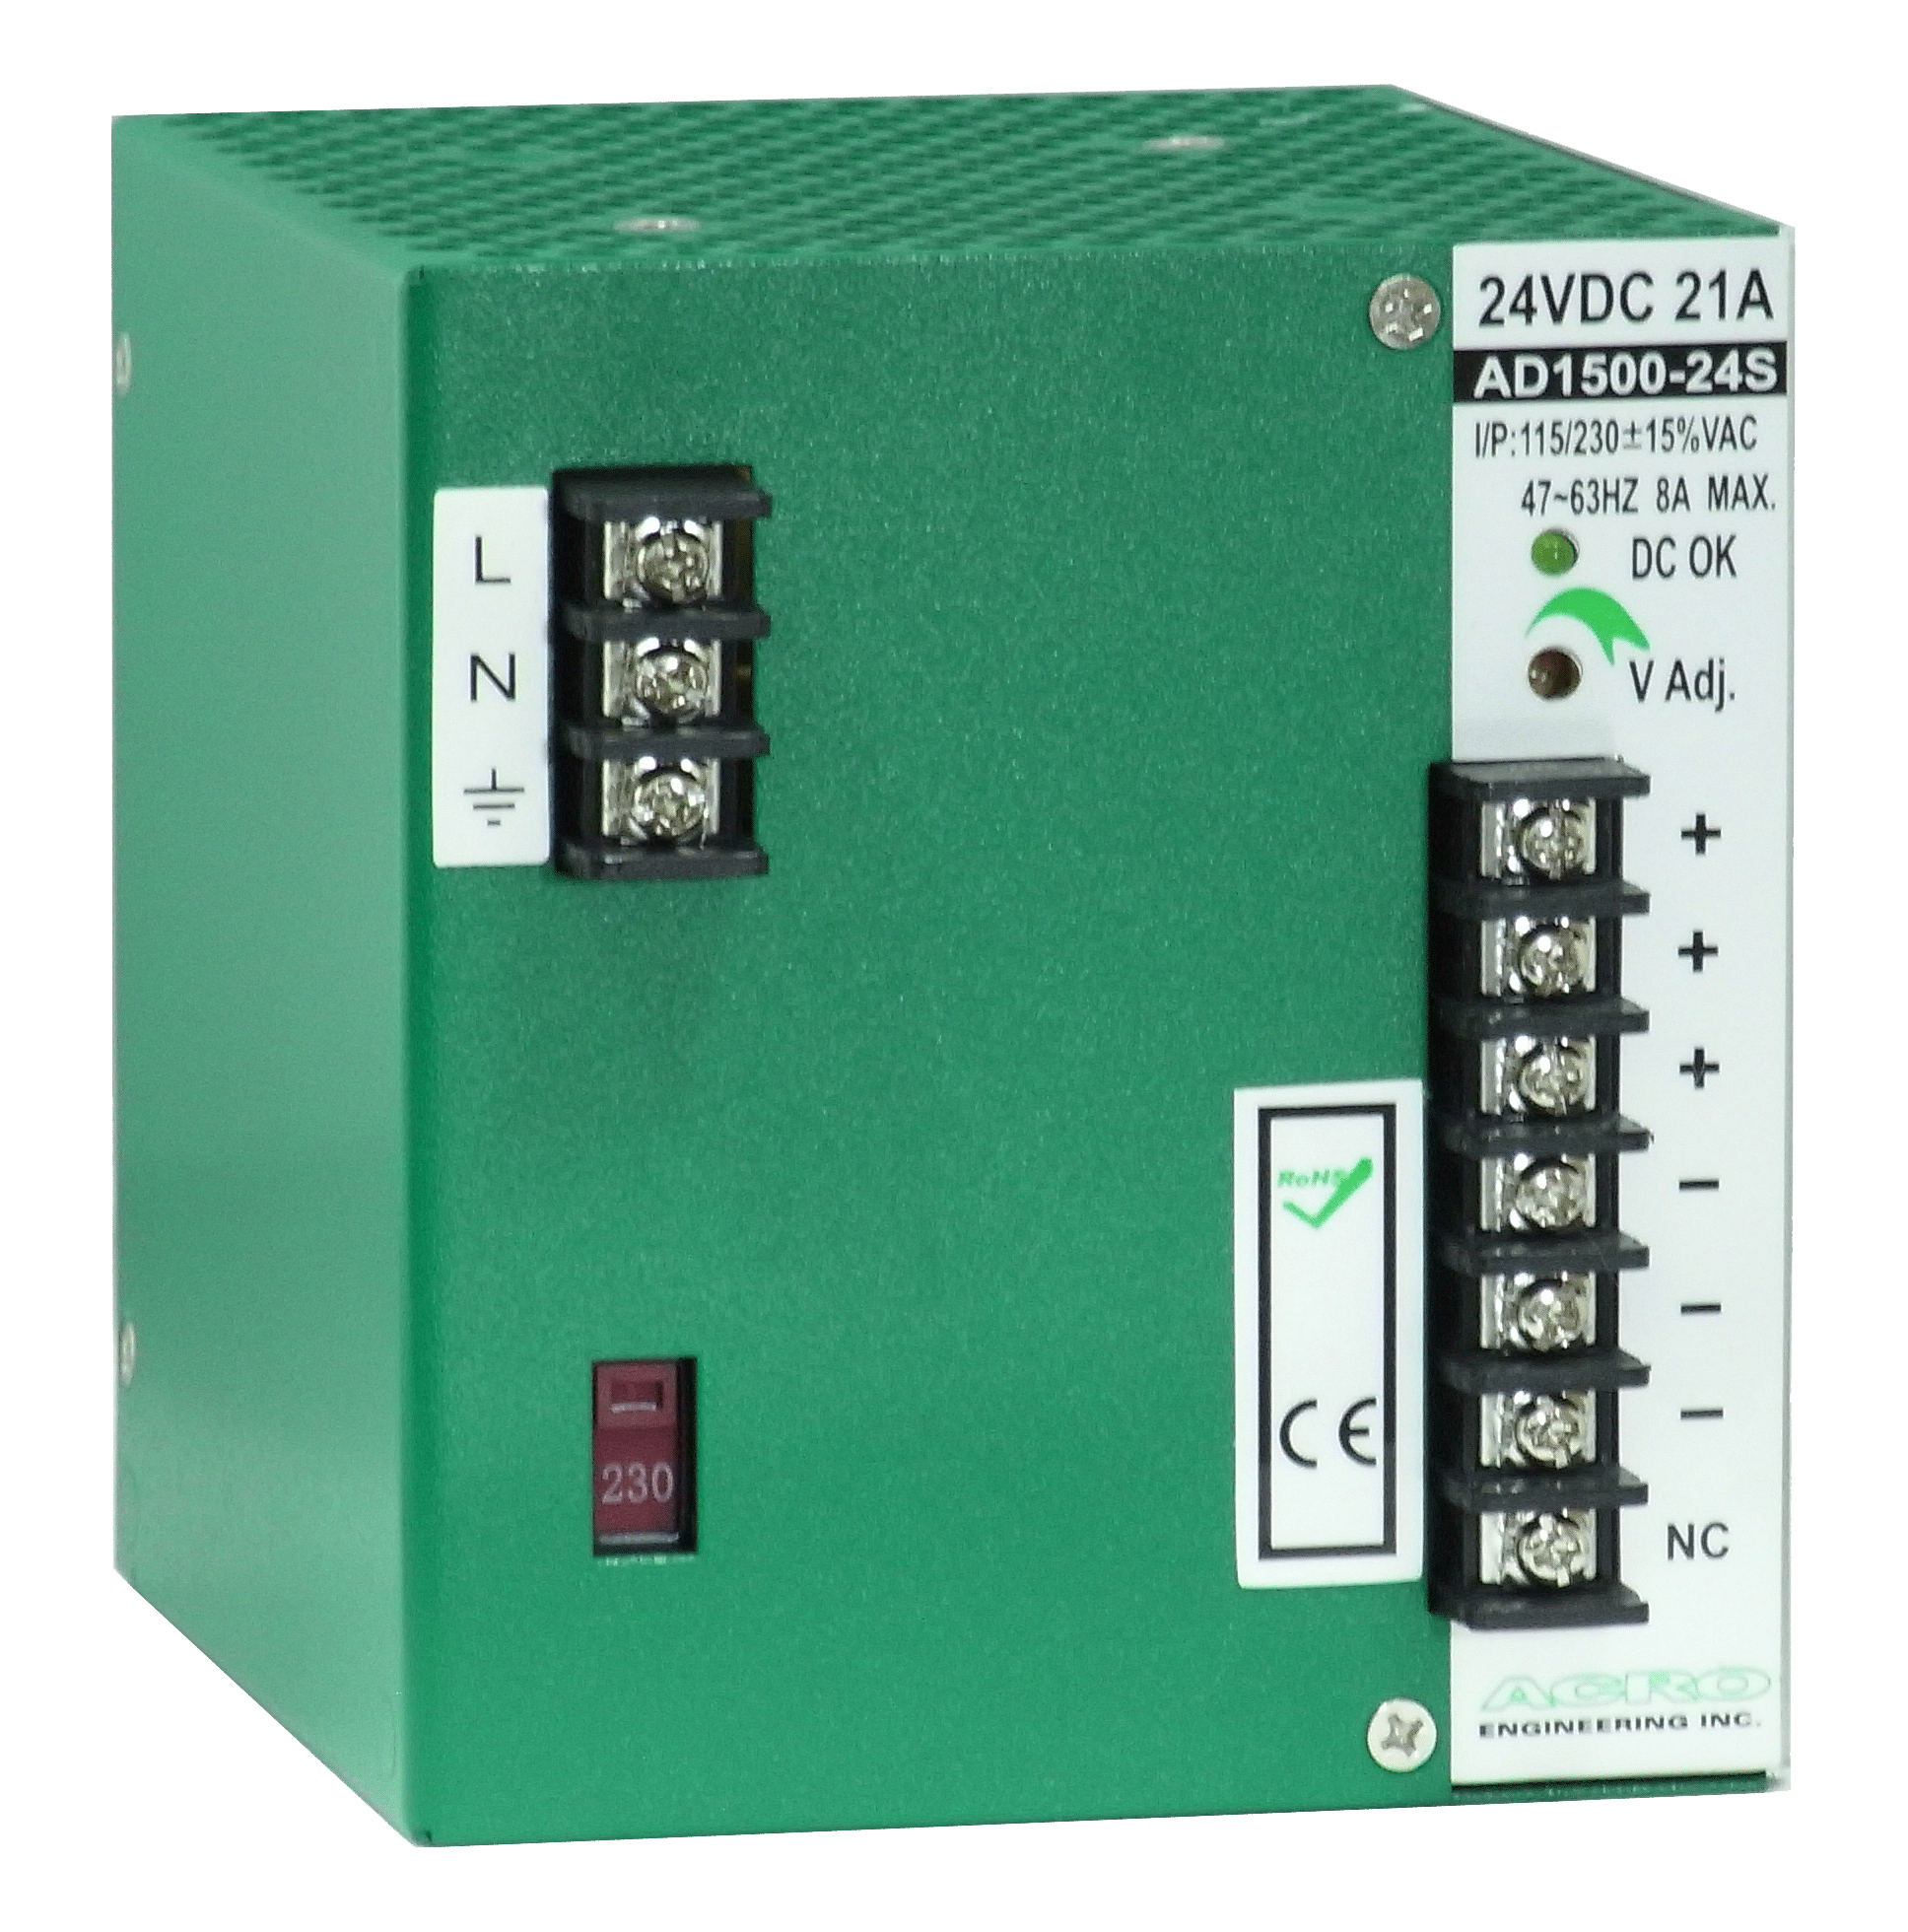 AD1500S Series DIN Rail Mounting Power Supply